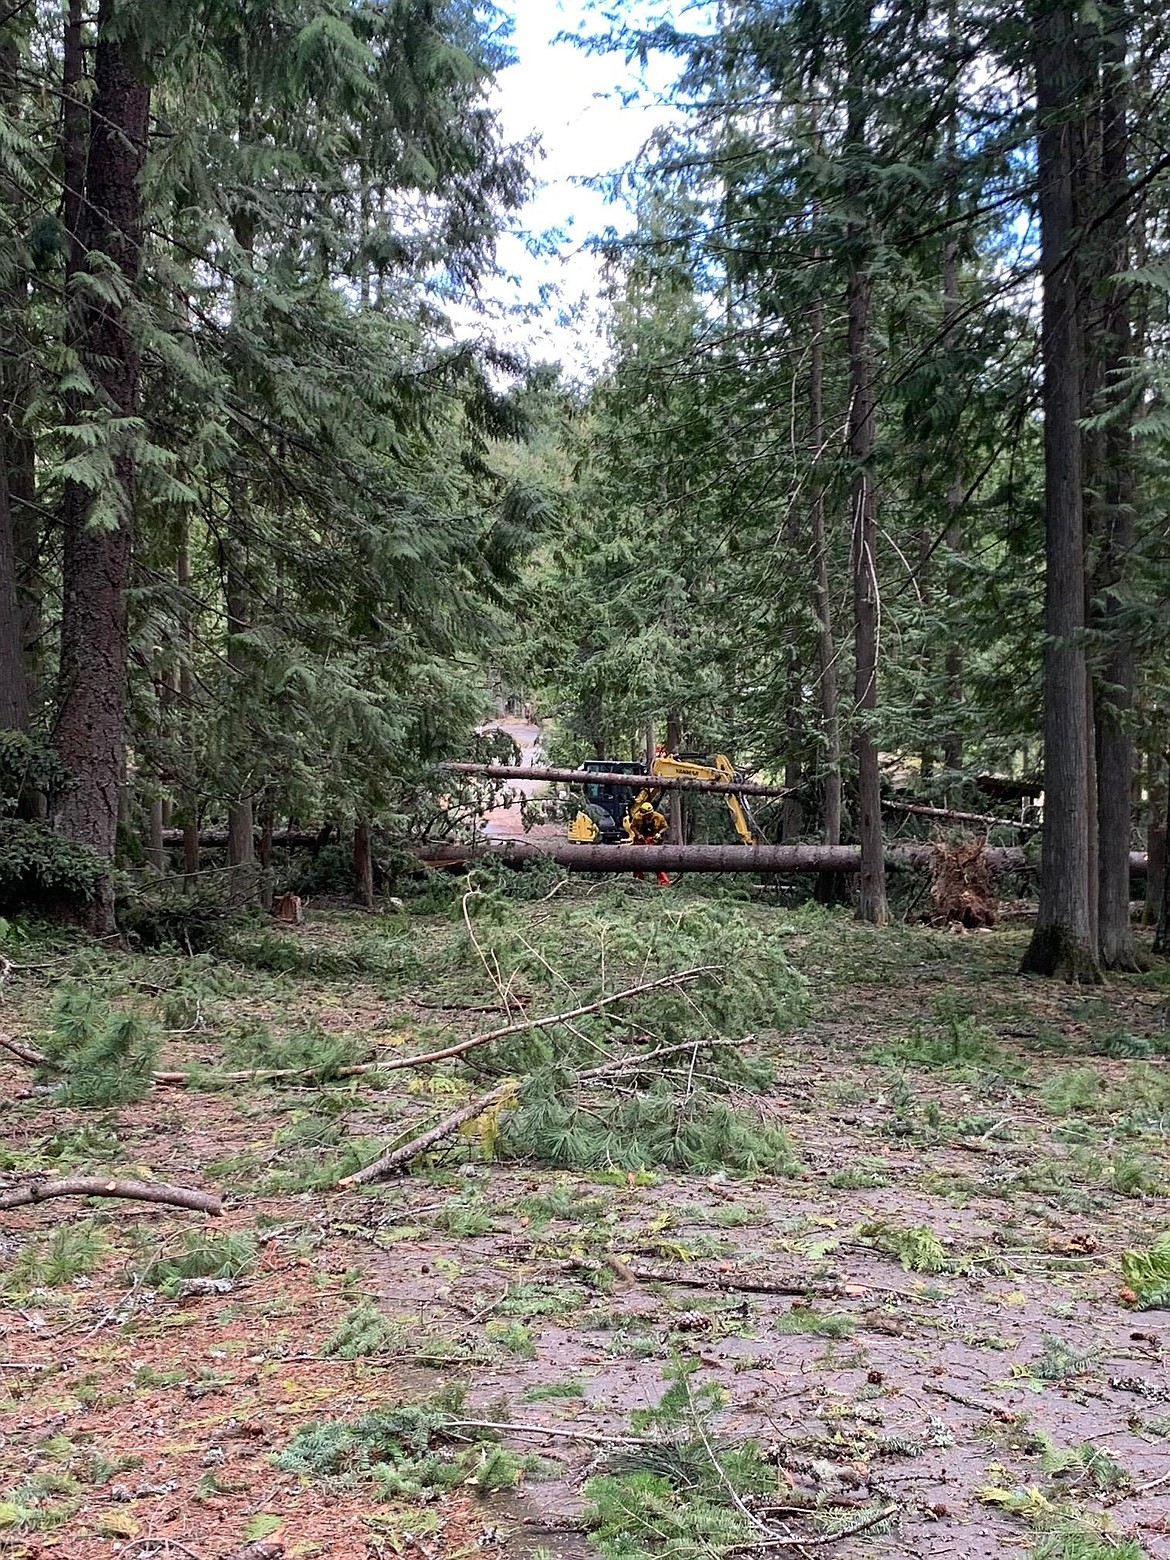 An individual works to remove a tree blocking a roadway last September after a devastating windstorm hit the area. The trees was one of many knocked down in the storm and thousands more were identified as potential hazards and are in the process of being removed.